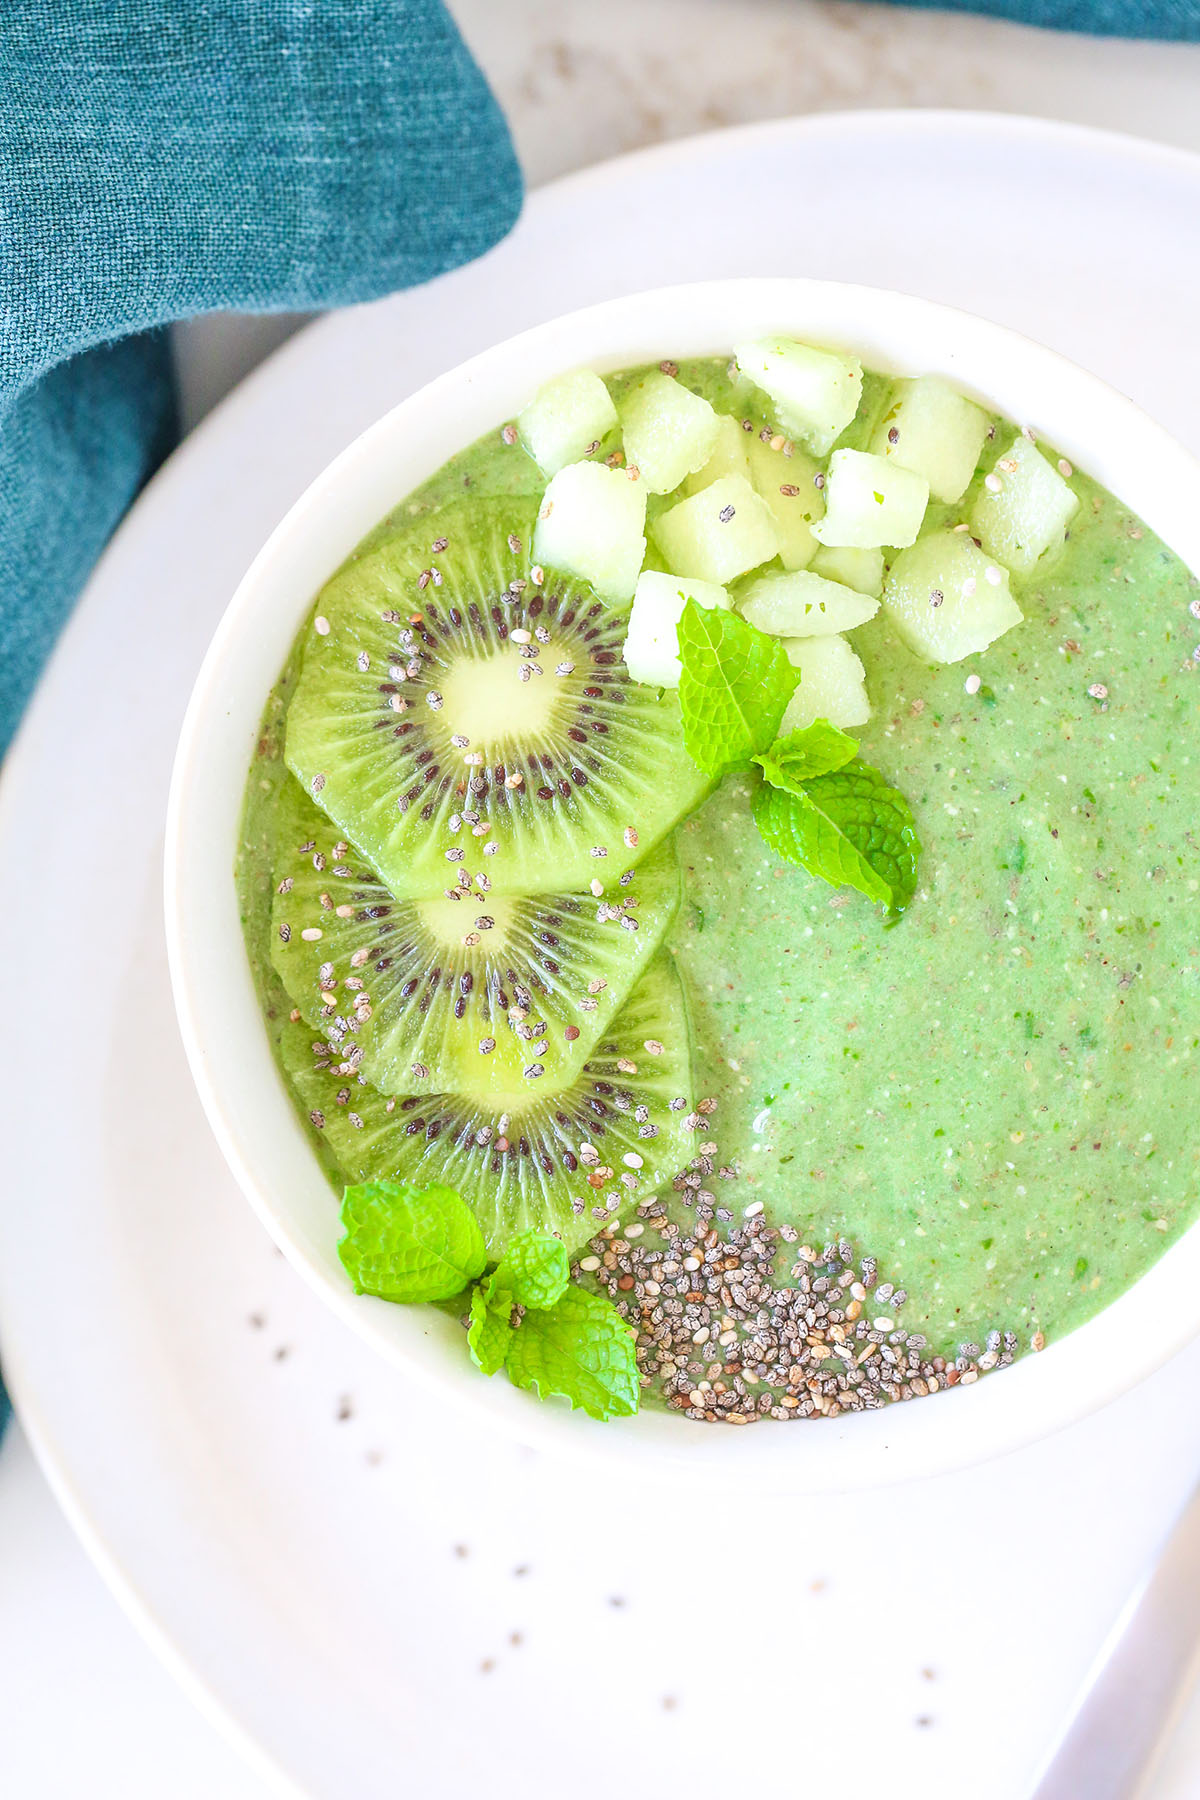 Only got 5 mins for brekky? This one's your ticket! Plus it packs a serious nutrient punch too. Vegan, plant-based, nut free, low in sugar, low in calories, and only 5 ingredients. The easiest most delicious green smoothie bowl!